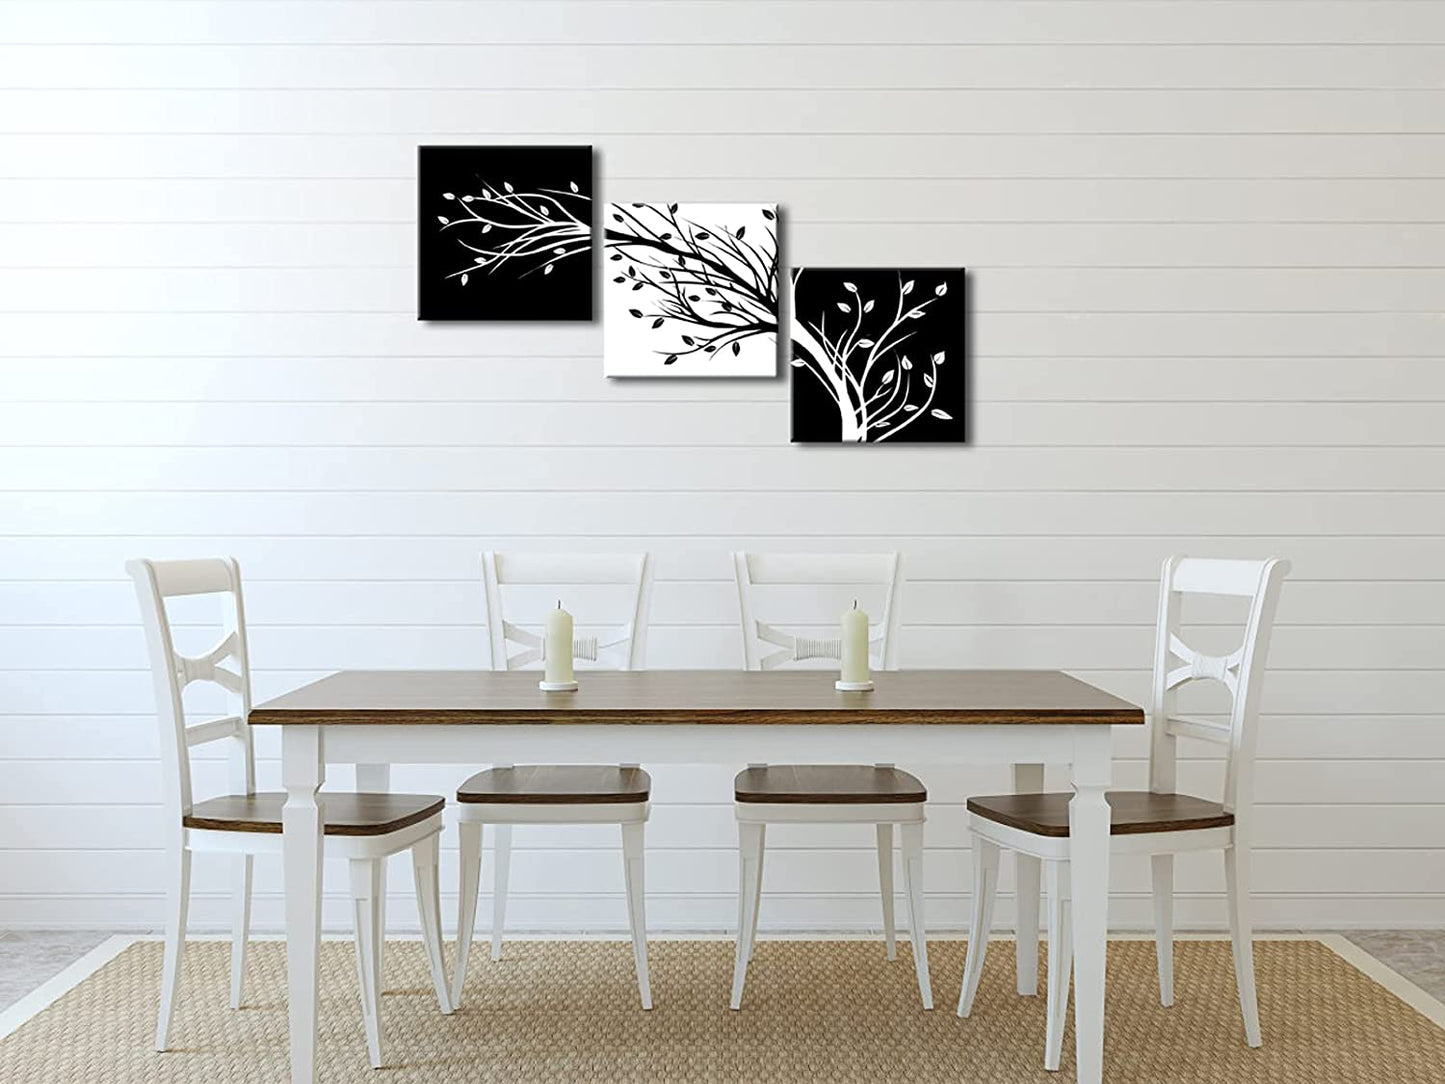 3 Panel Wall Art Black and White Leaves on Canvas Floral Trees